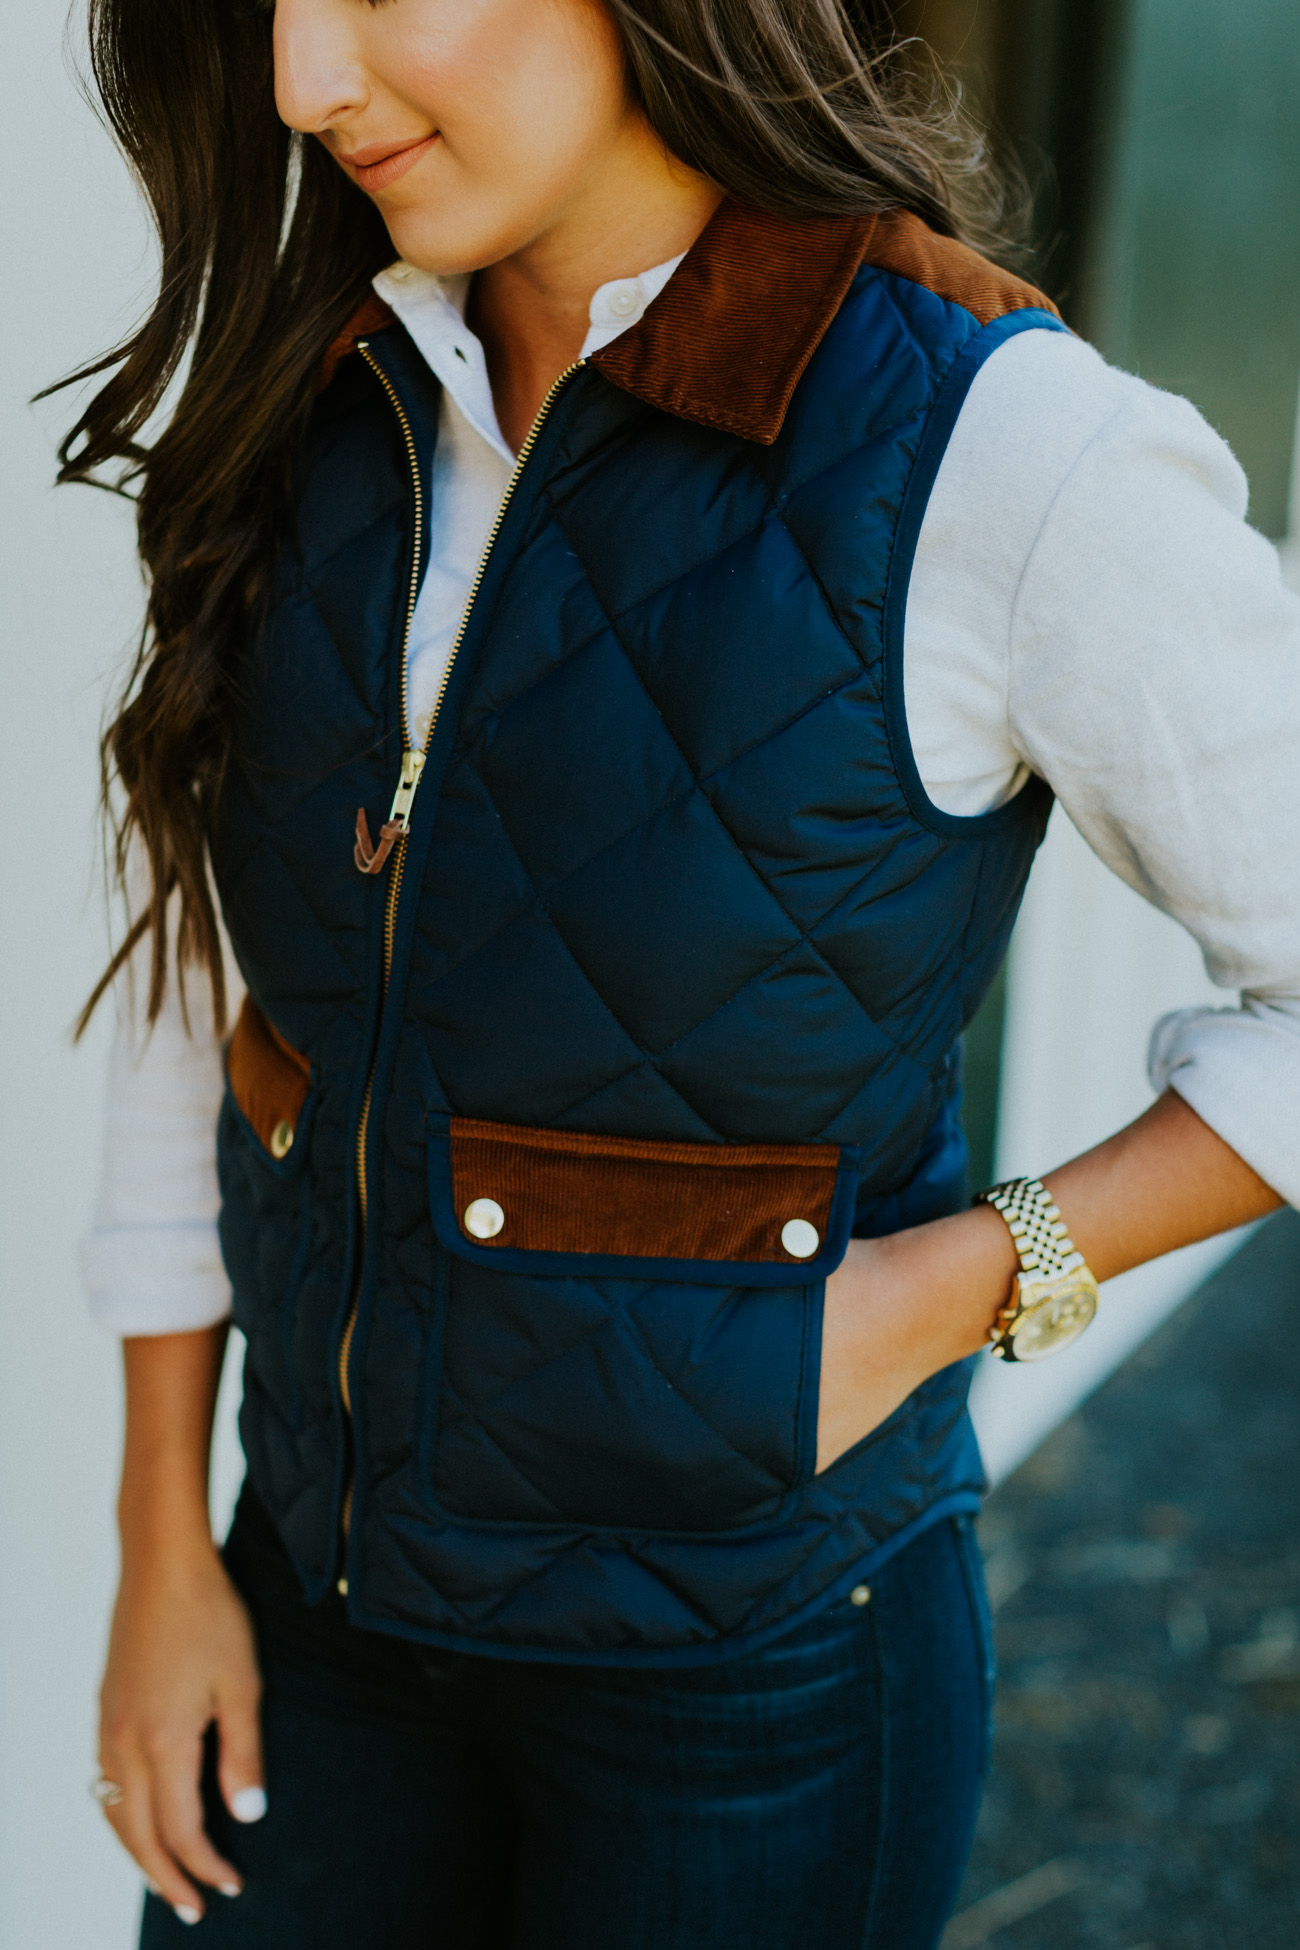 j.crew quilted puffer vest, j.crew excursion vest, preppy fall look, preppy vest, quilted puffer vest, southern outfit, southern fashion blogger, suede booties, tan booties, flannel shirt, flannel button down, madewell outfit // grace wainwright a southern drawl